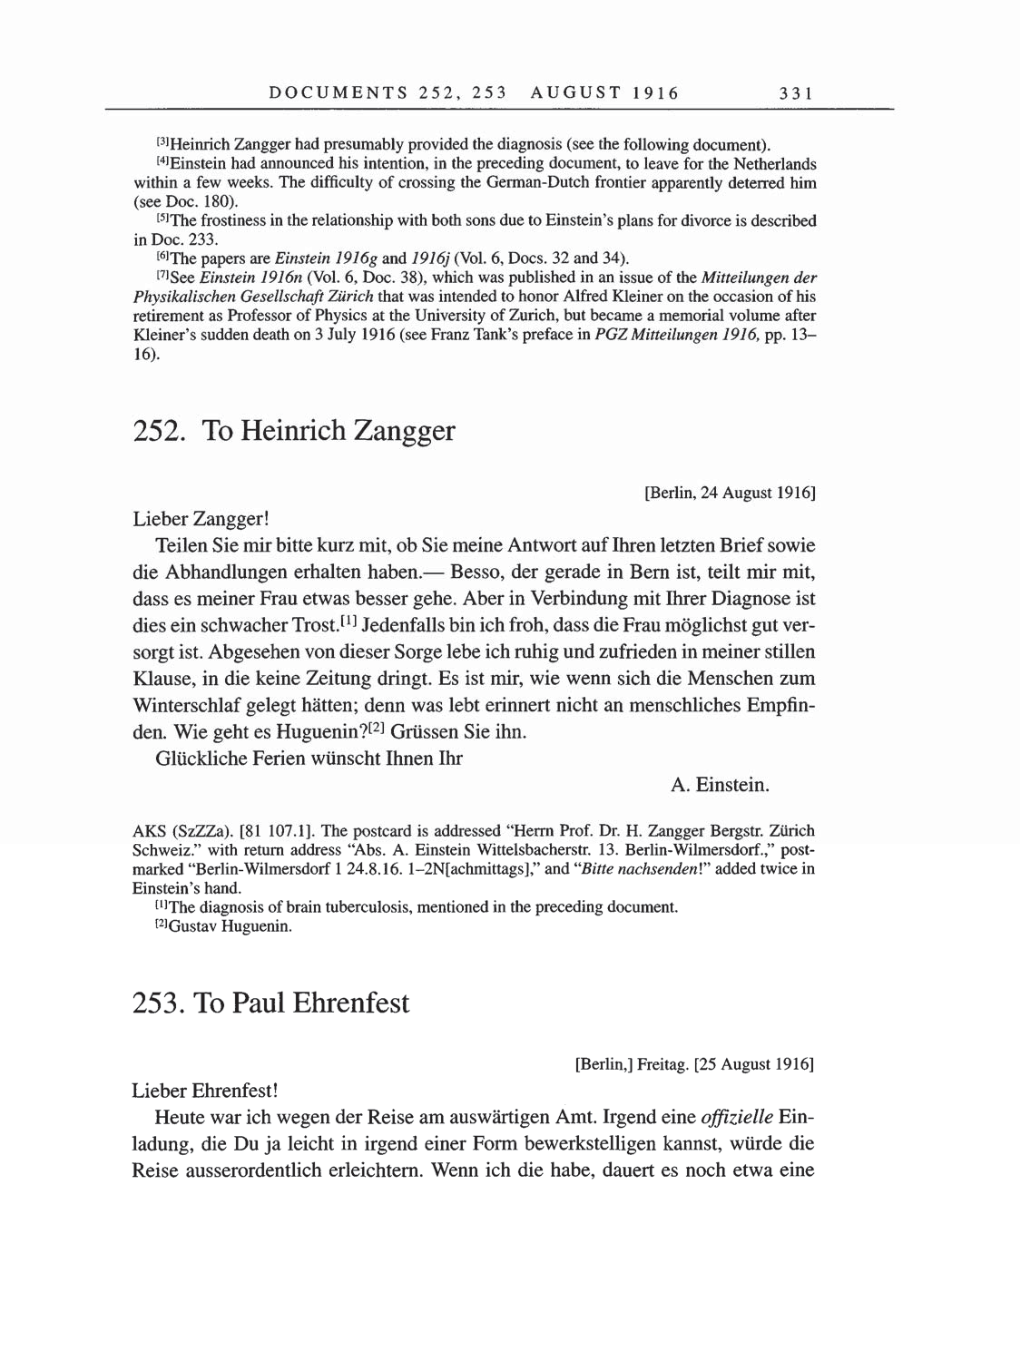 Volume 8, Part A: The Berlin Years: Correspondence 1914-1917 page 331